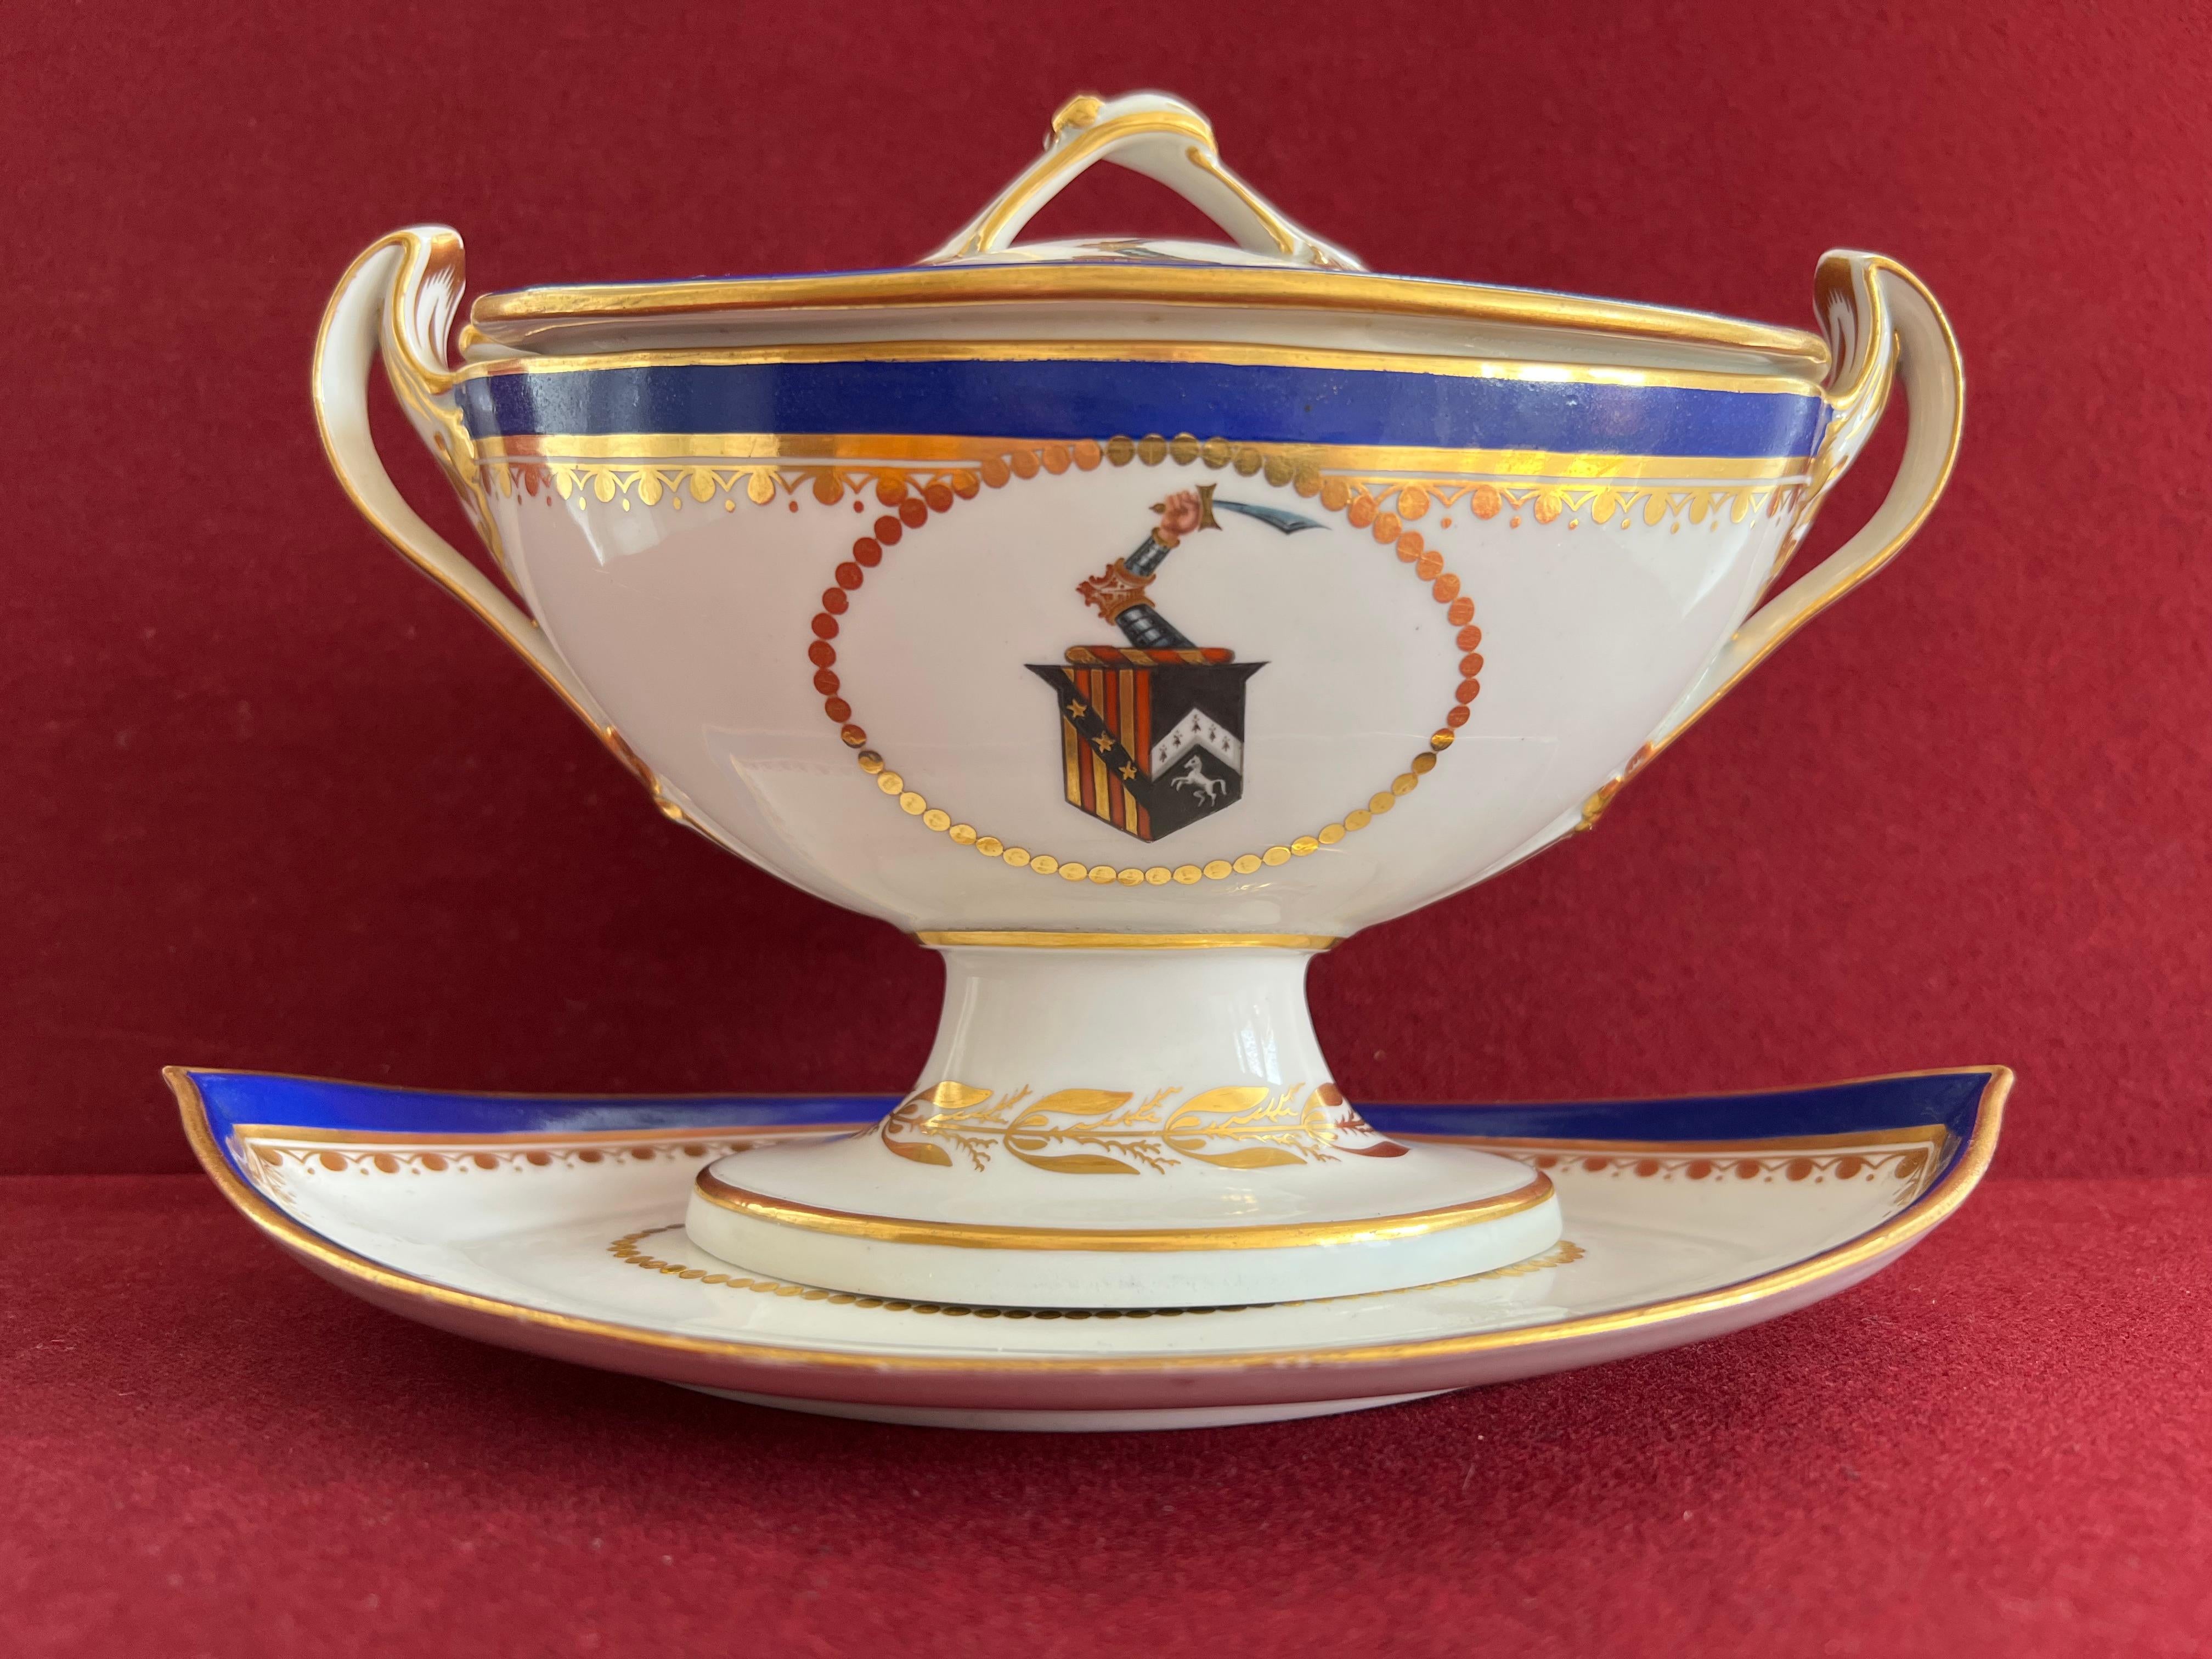 A fine Derby porcelain sauce tureen and stand c.1795-1800. Of navette shape, finely decorated with a blue band with gilding and the crest of the Elton family to the centre of each piece. In Heraldry, the crest is described as follows: Paly of six or